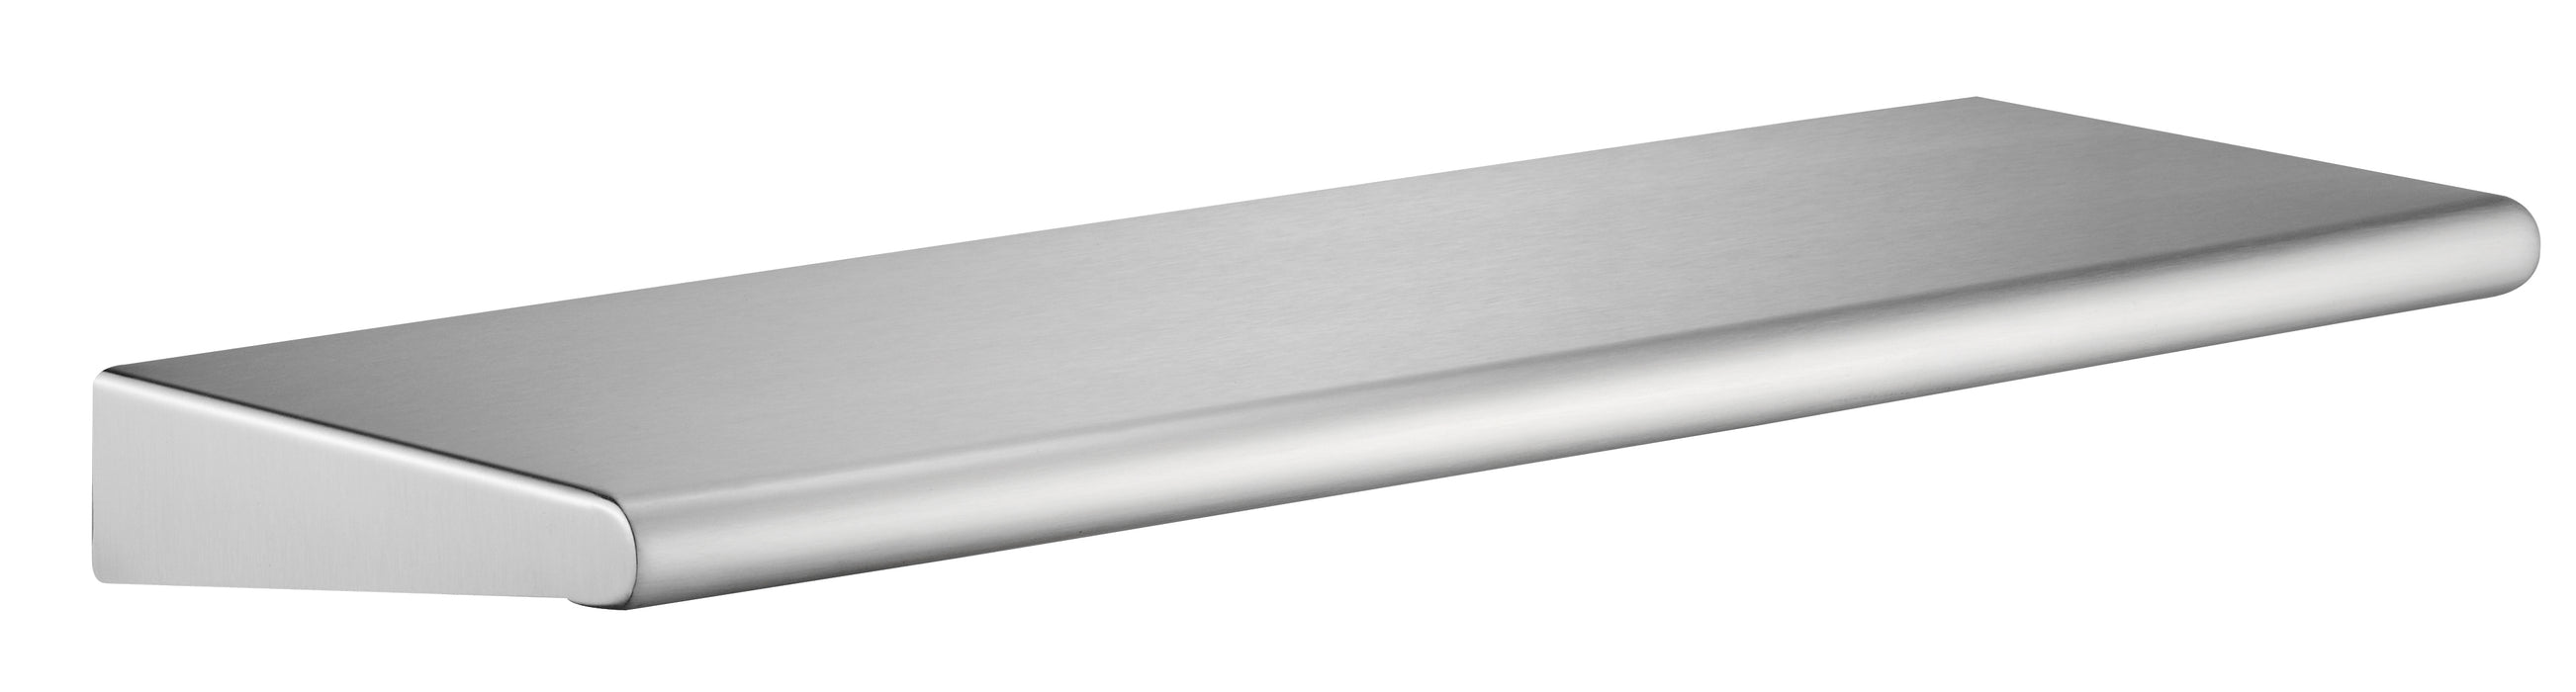 ASI 20692-636 Surface Mounted Shelf, Stainless Steel, 6 X 36 Inch